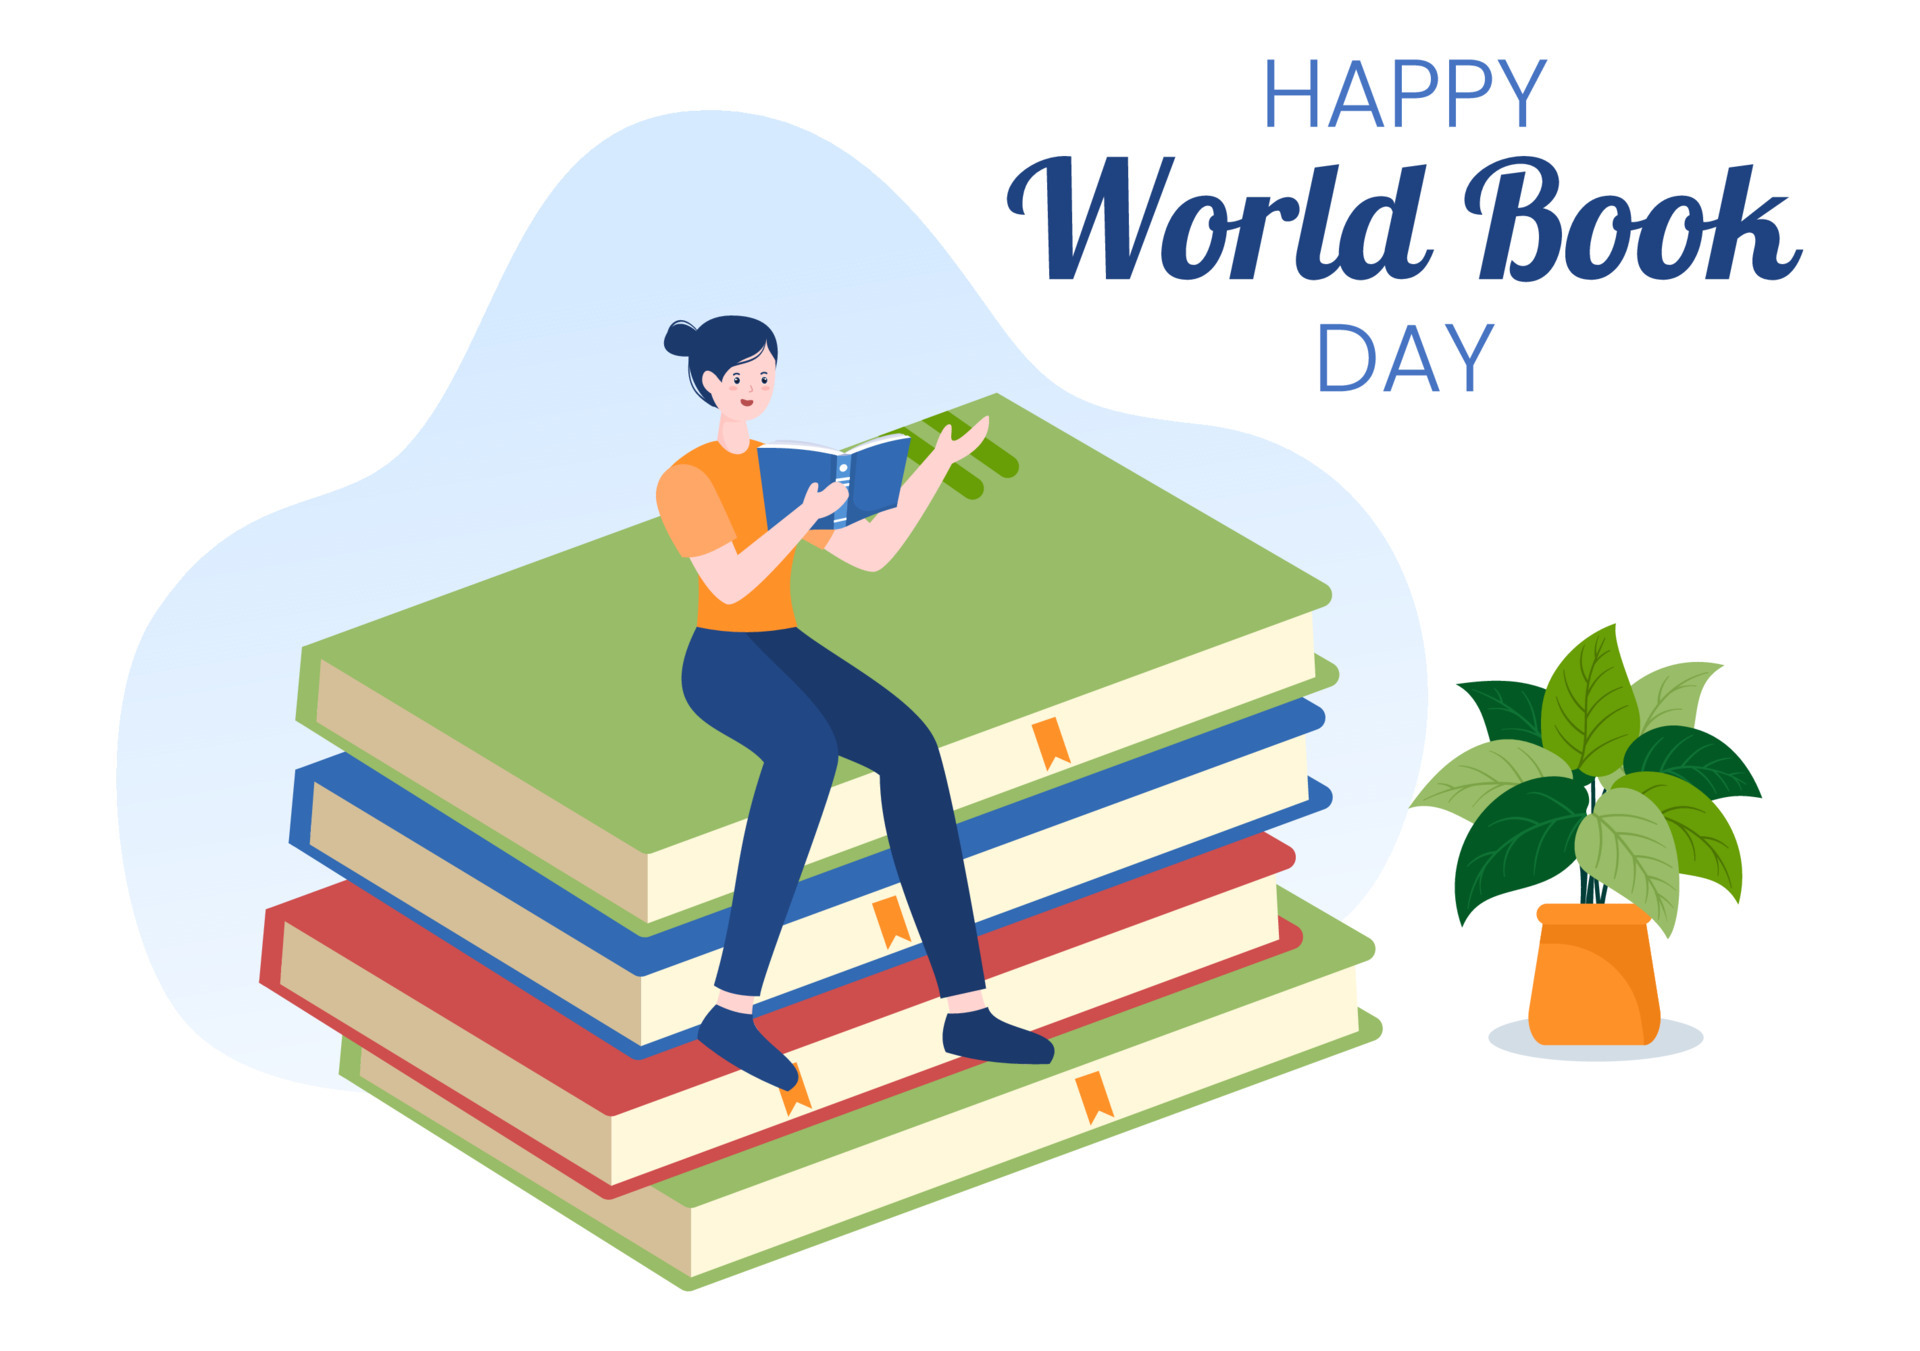 World Book Day Flat Cartoon Background Illustration. Stack of Books to Reading, Increase Insight and Knowledge Suitable for Wallpaper or Poster